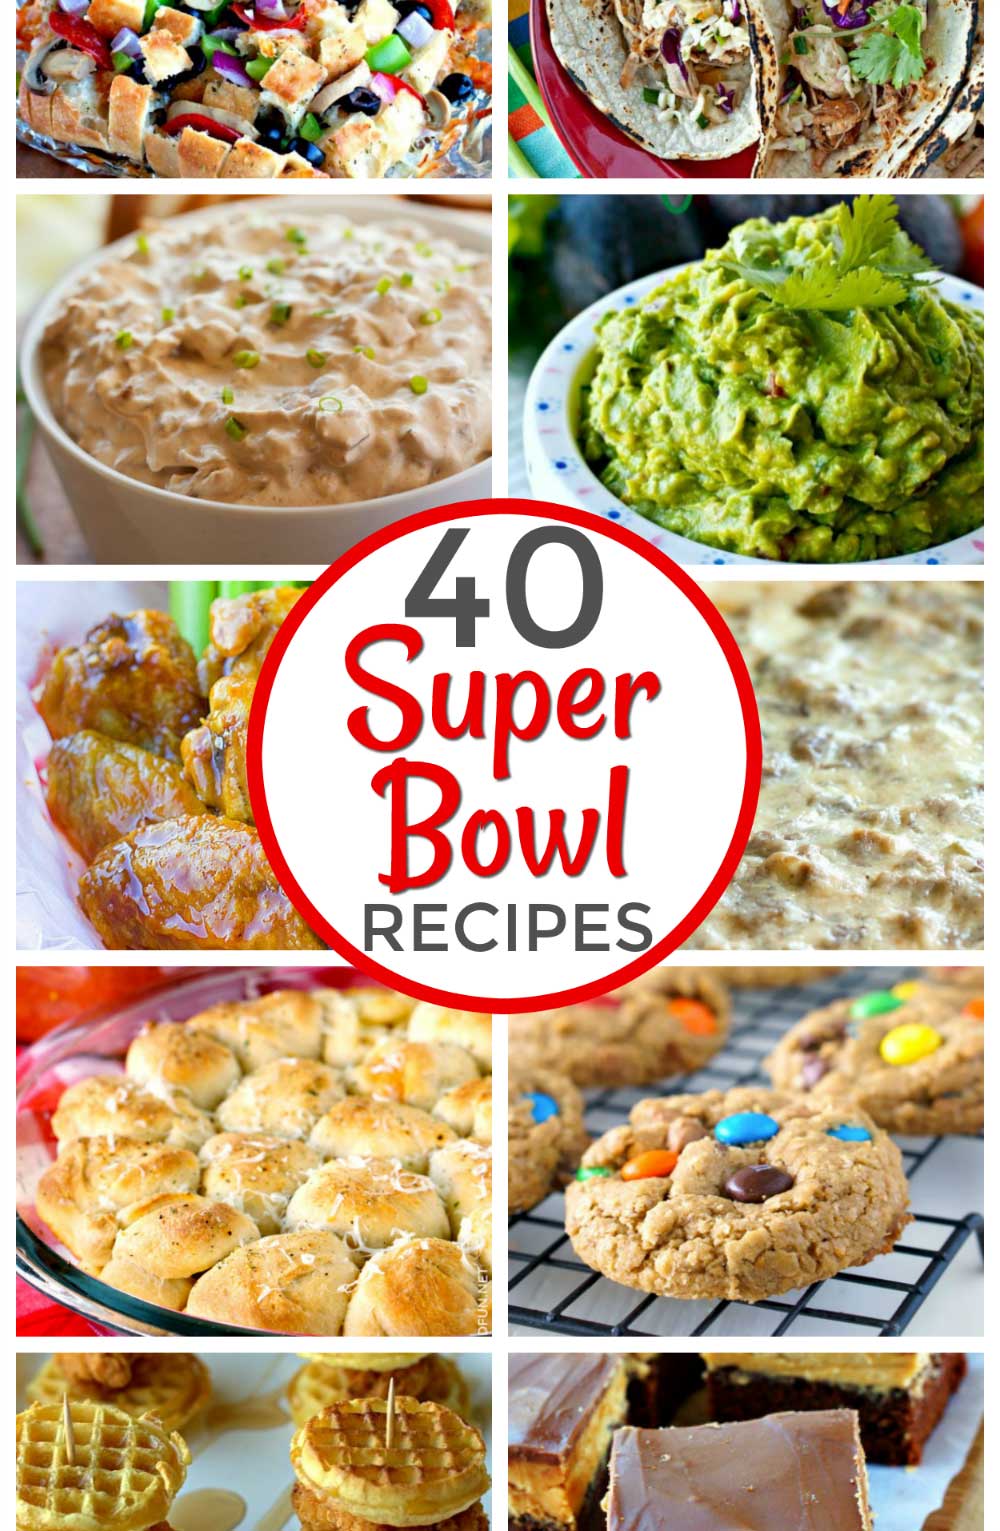 Superbowl food ideas for the big game.